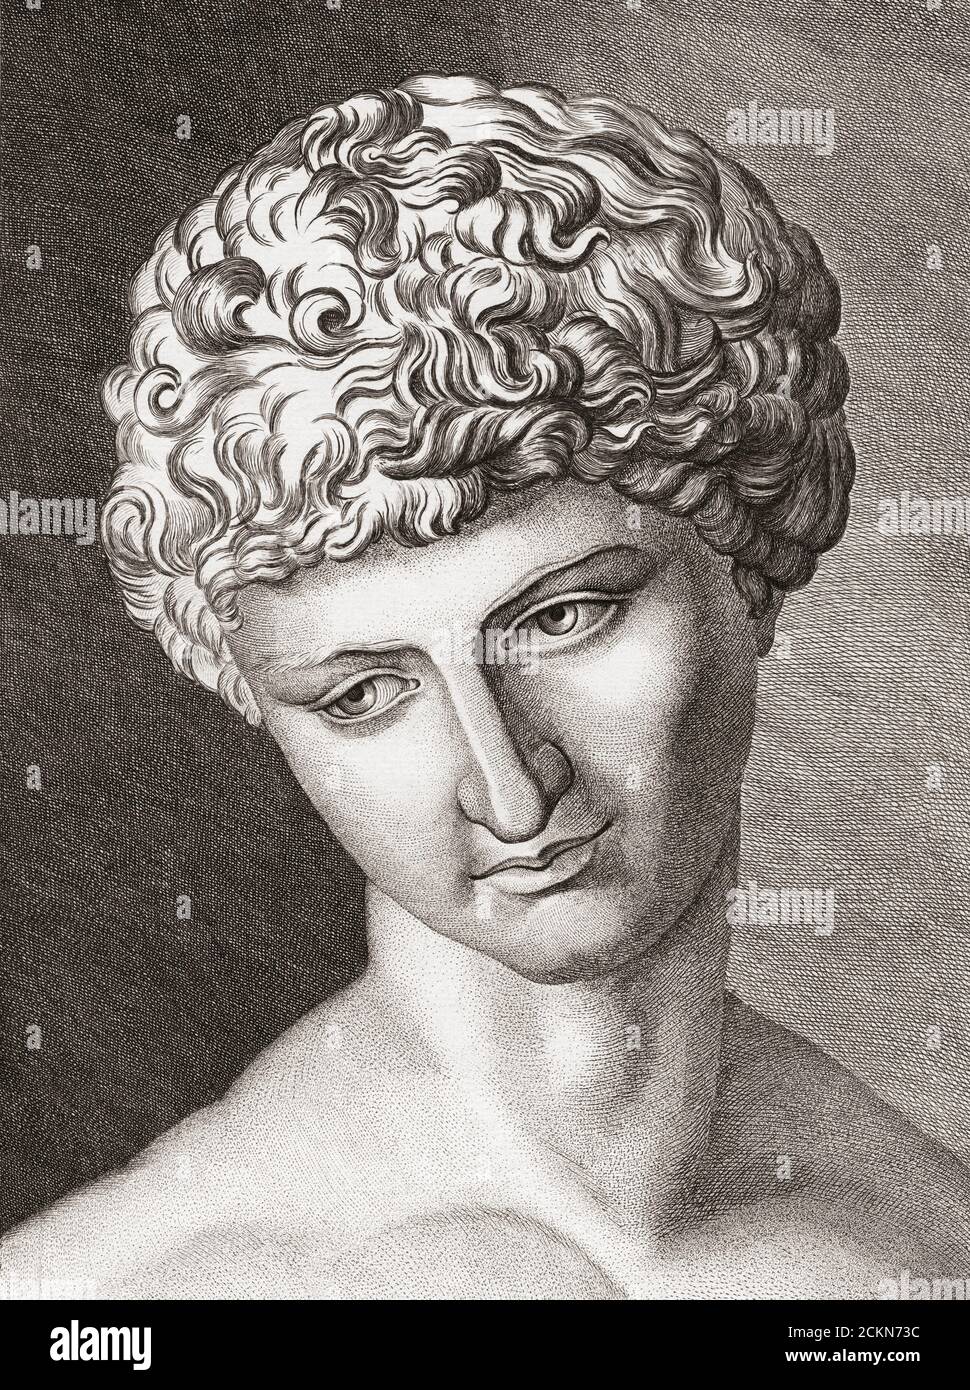 Antinous, or Antinoos, circa 111-130.  Bithynian-Greek youth and lover of the Roman emperor Hadrian.  After his untimely death Hadrian proclaimed Antinous a deity.   After a 19th century work by an unidentified artist. Stock Photo